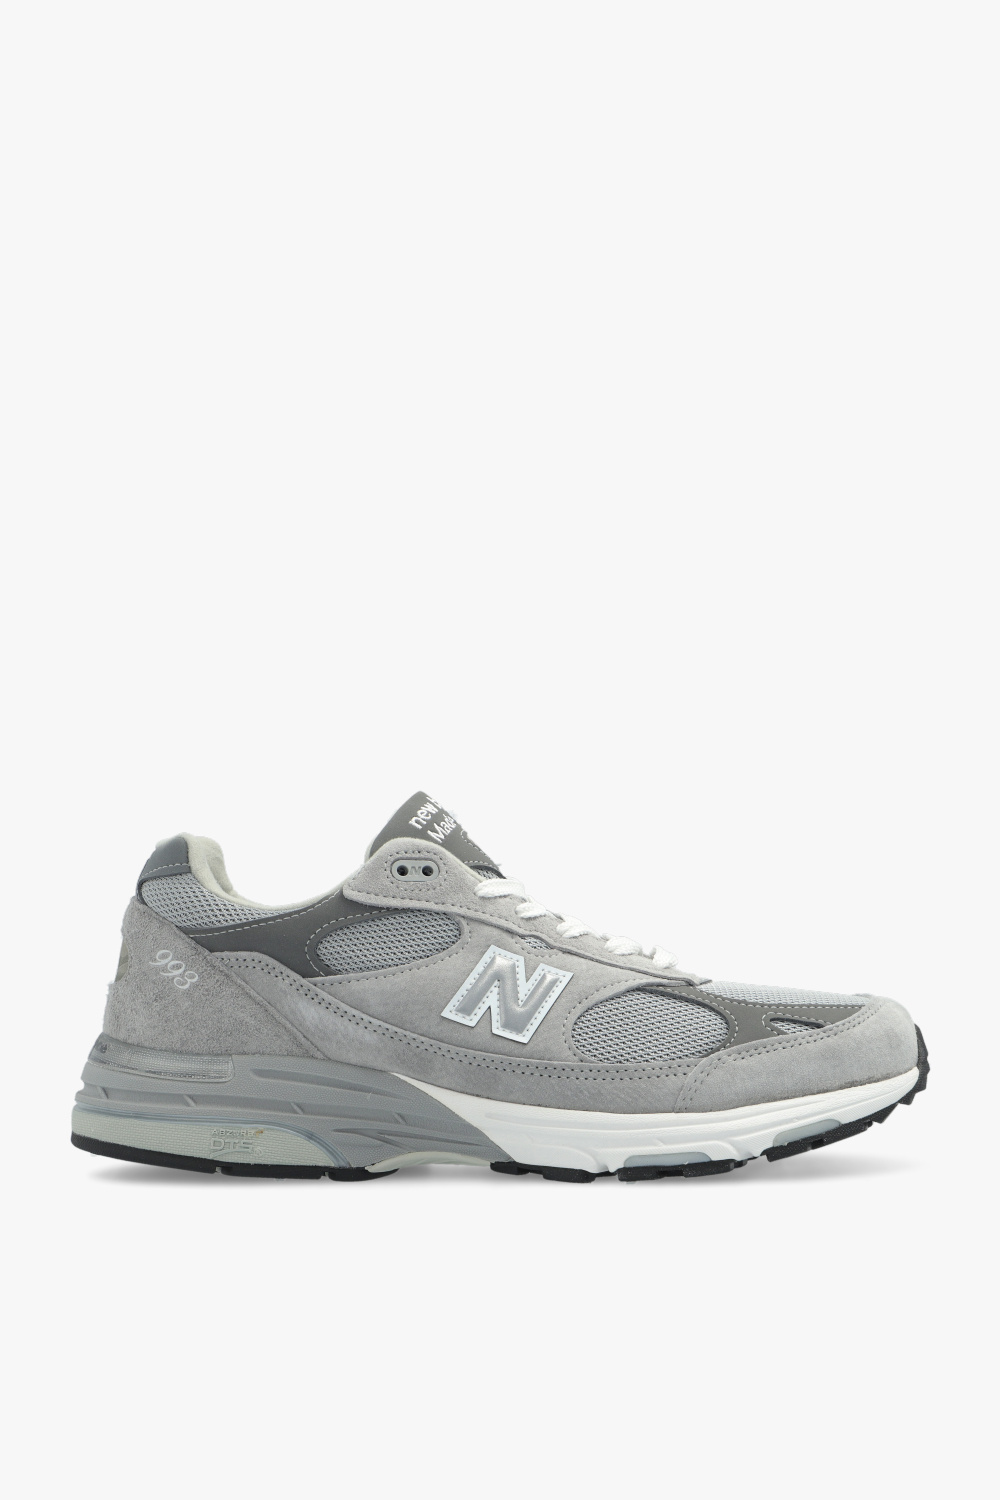 New Balance ‘MR993GL’ sneakers from ‘Made in UK’ series